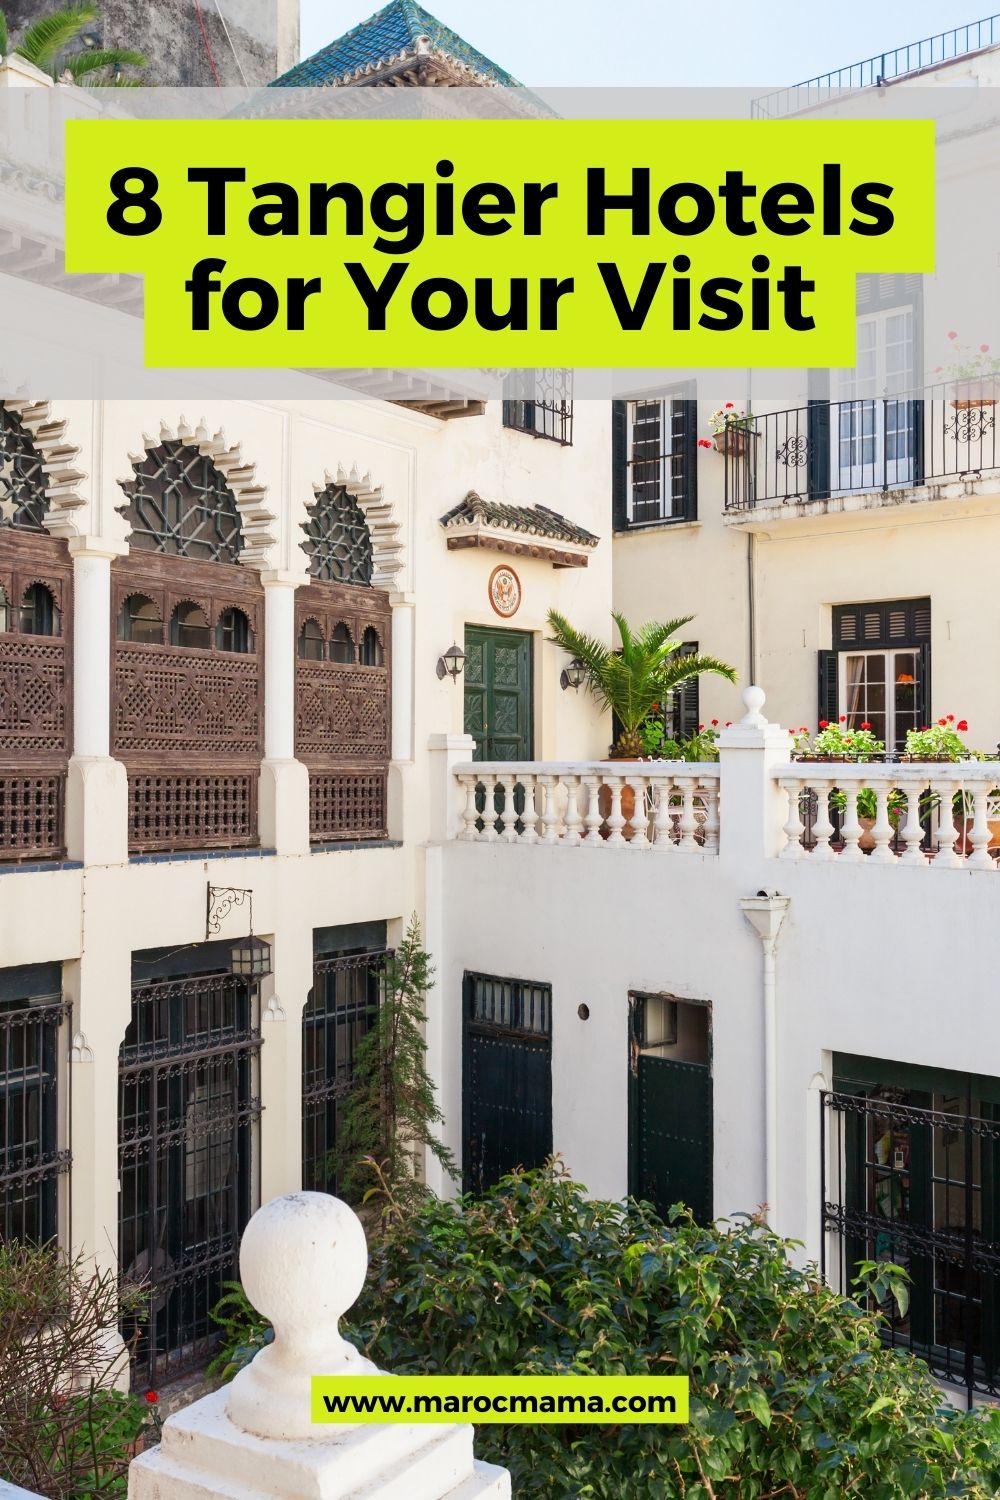 Exterior of Tangier American Legation Institute for Moroccan Studies in Tangier, Morocco with the text 8 Tangier Hotels for Your Visit